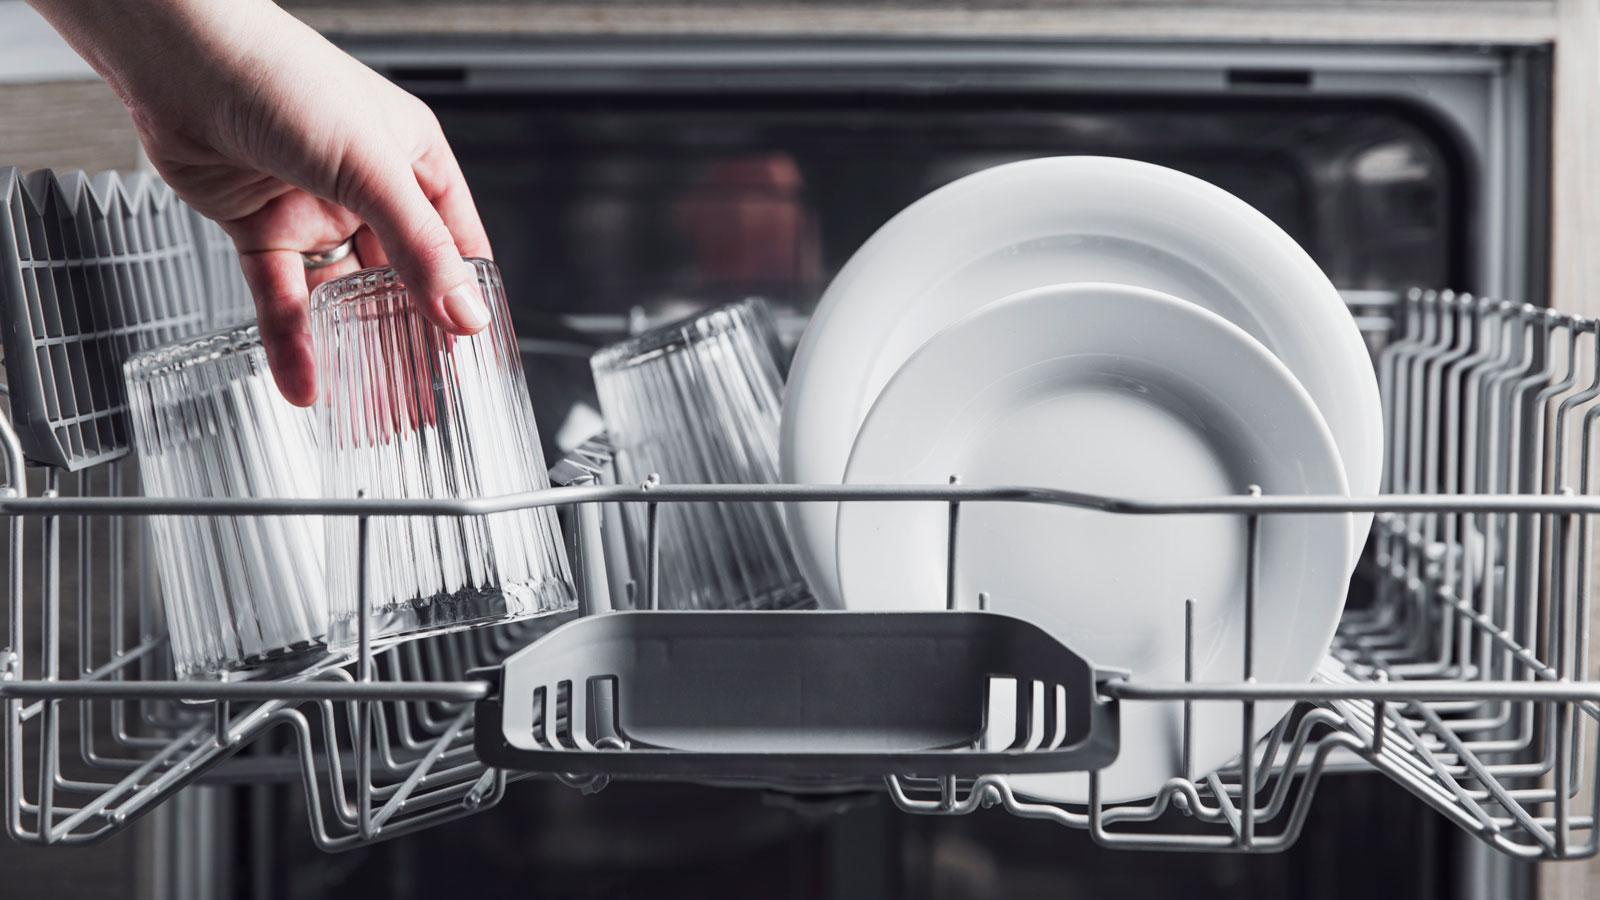 Open Dishwasher With Clean Cutlery Glasses Dishes Inside